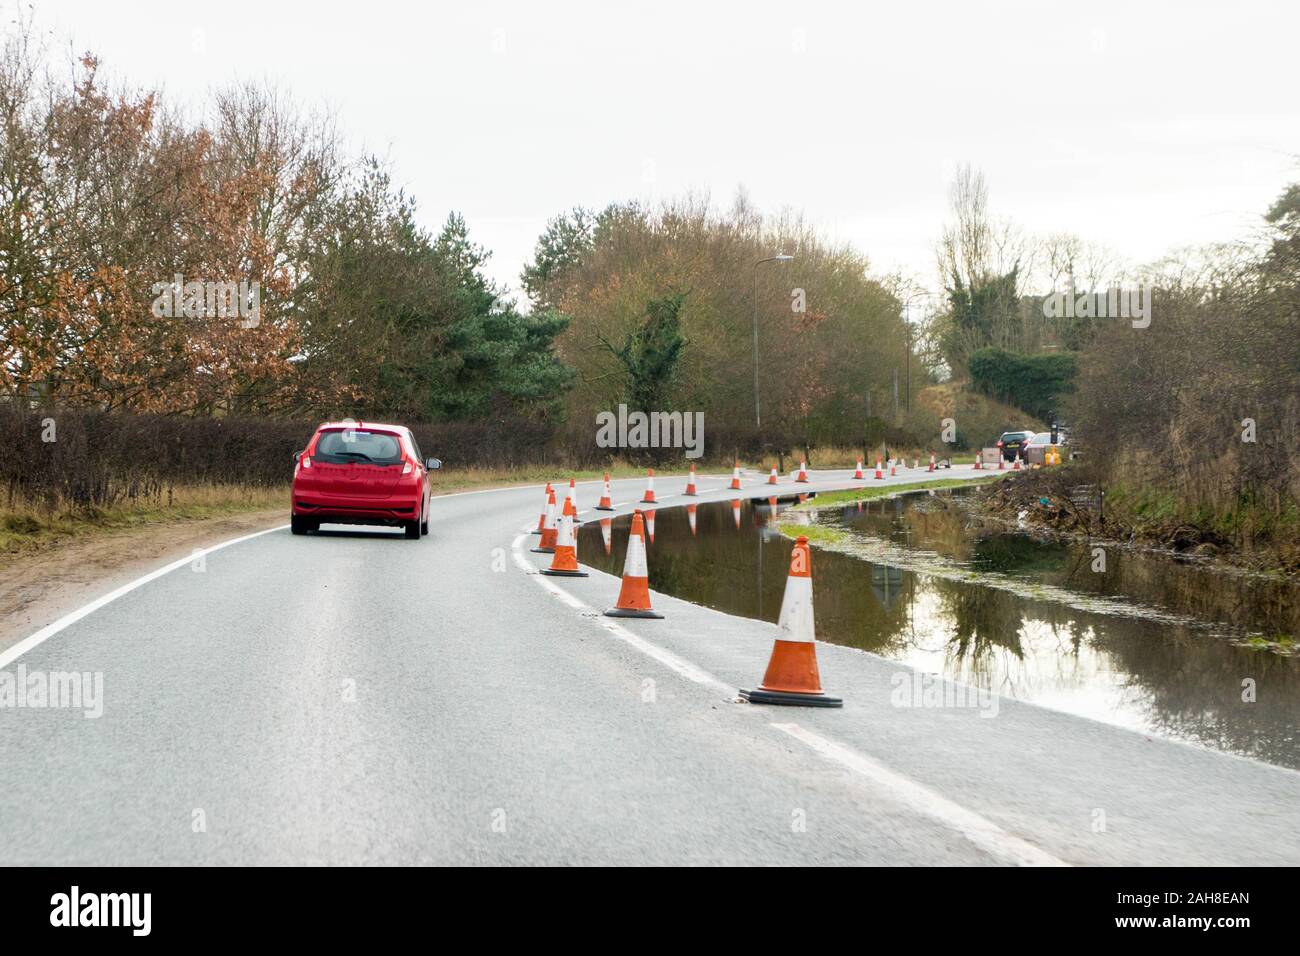 A main road through part of the United Kingdom is coned off to protect drivers from driving through a flooded lane. Stock Photo